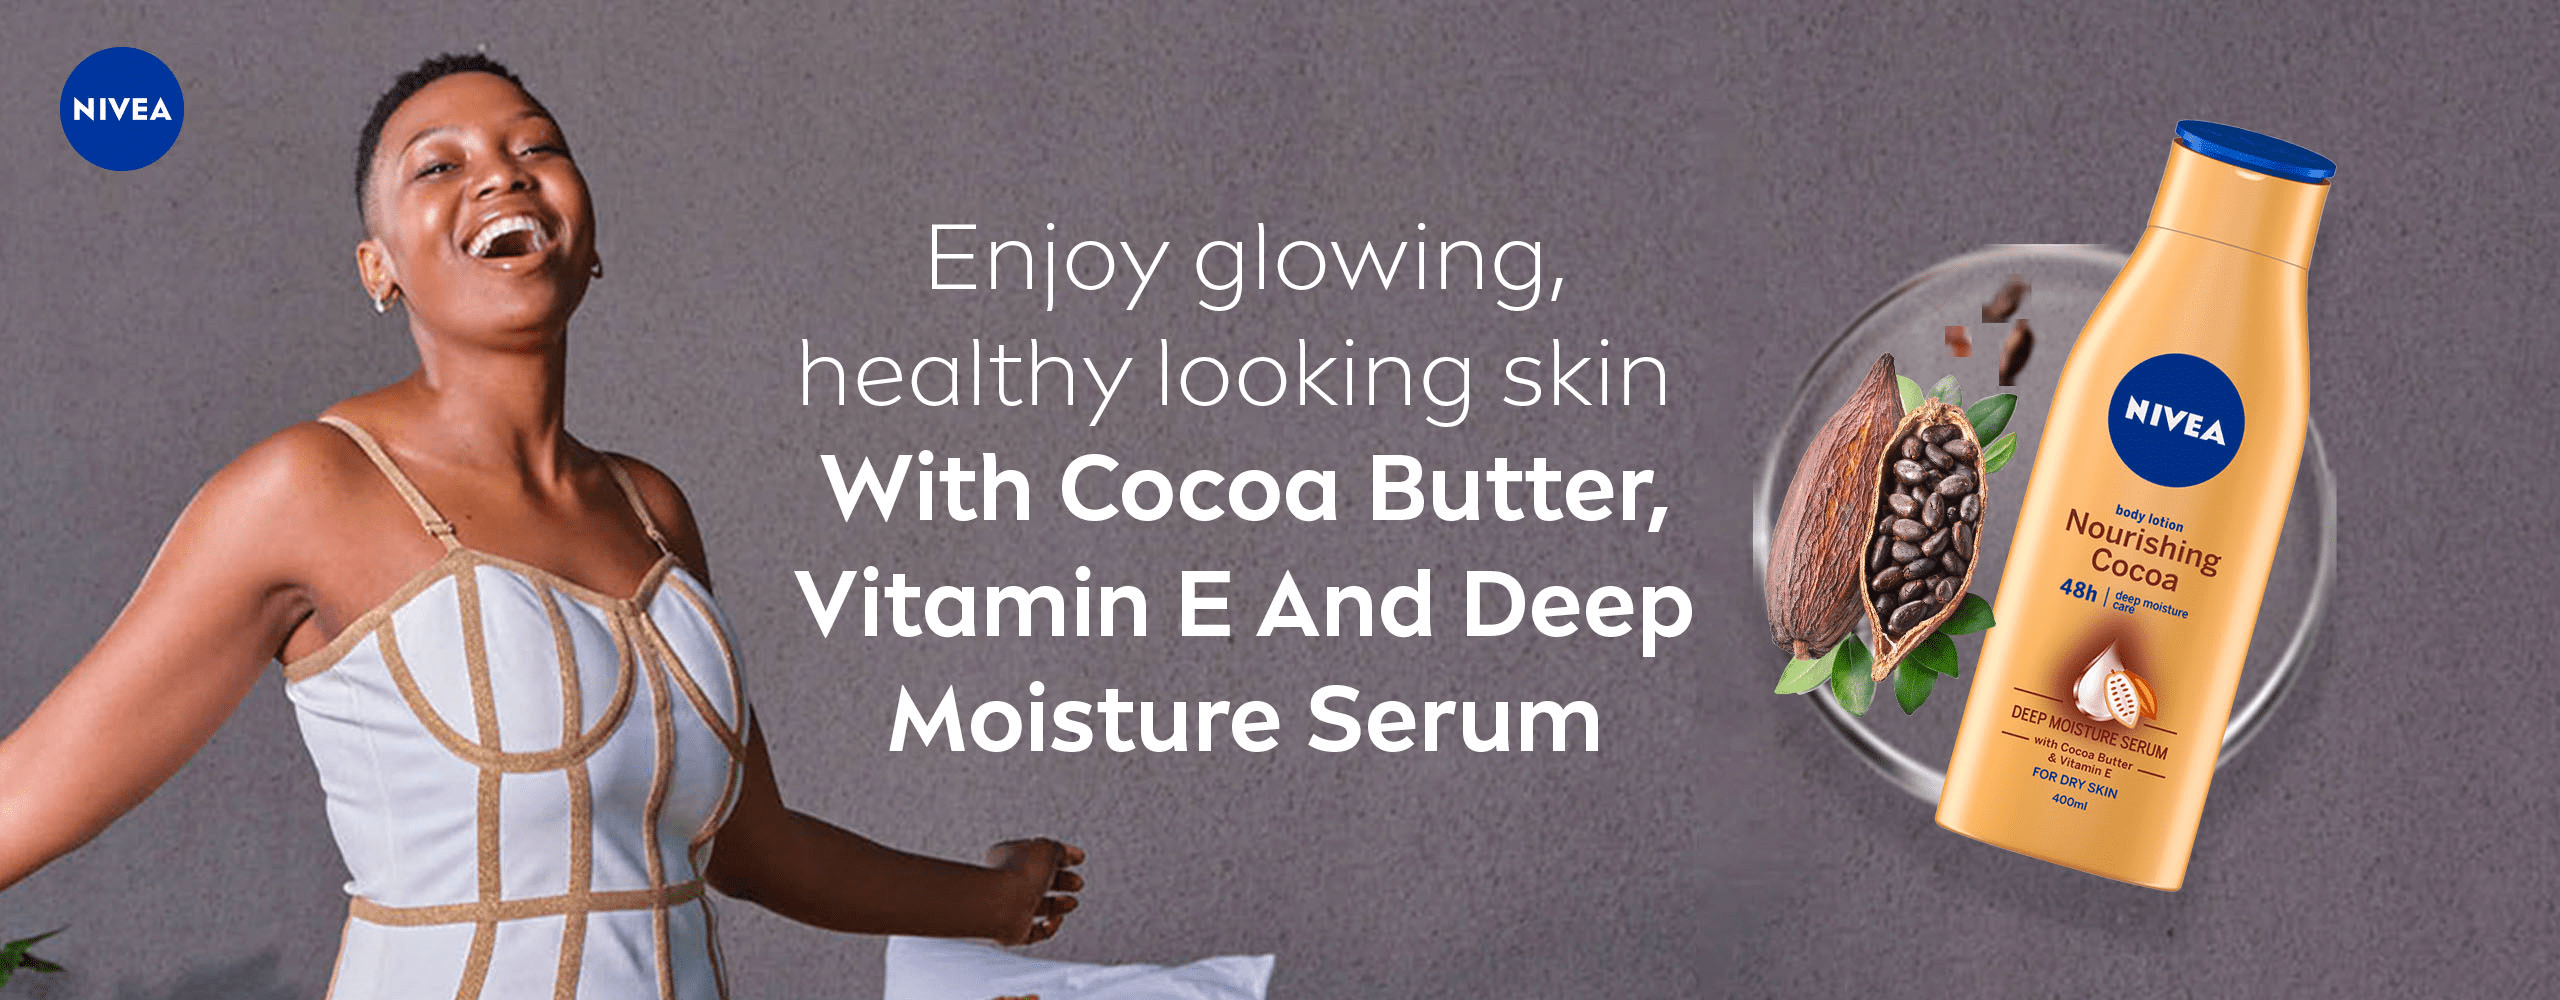 Wear Your Skin with Pride with NIVEA Nourishing Cocoa